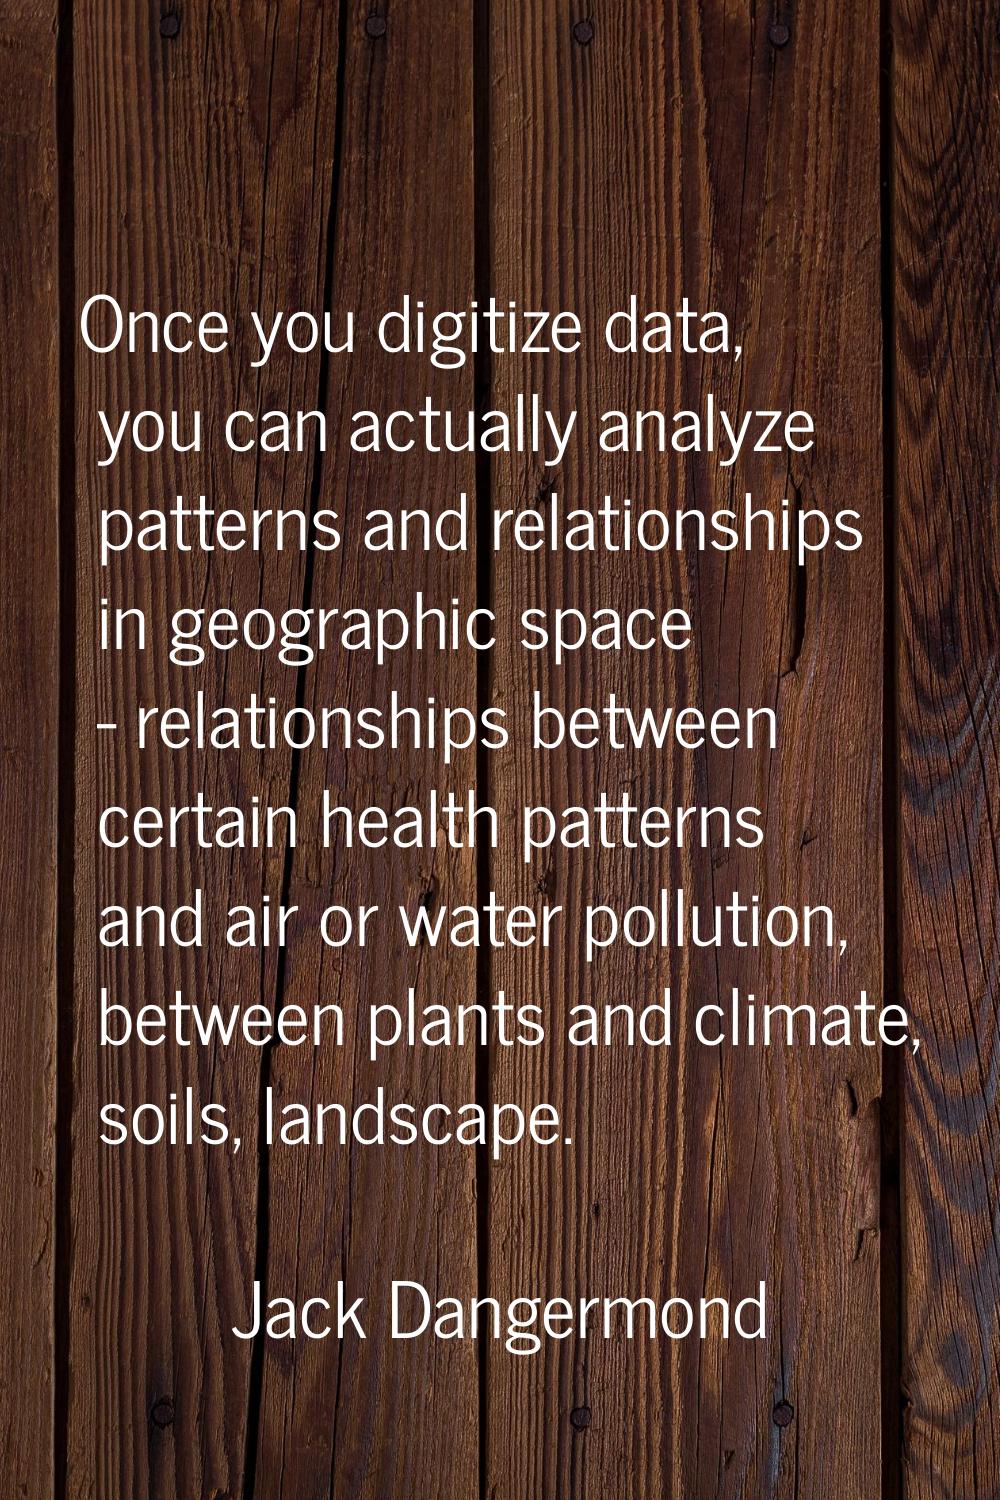 Once you digitize data, you can actually analyze patterns and relationships in geographic space - r